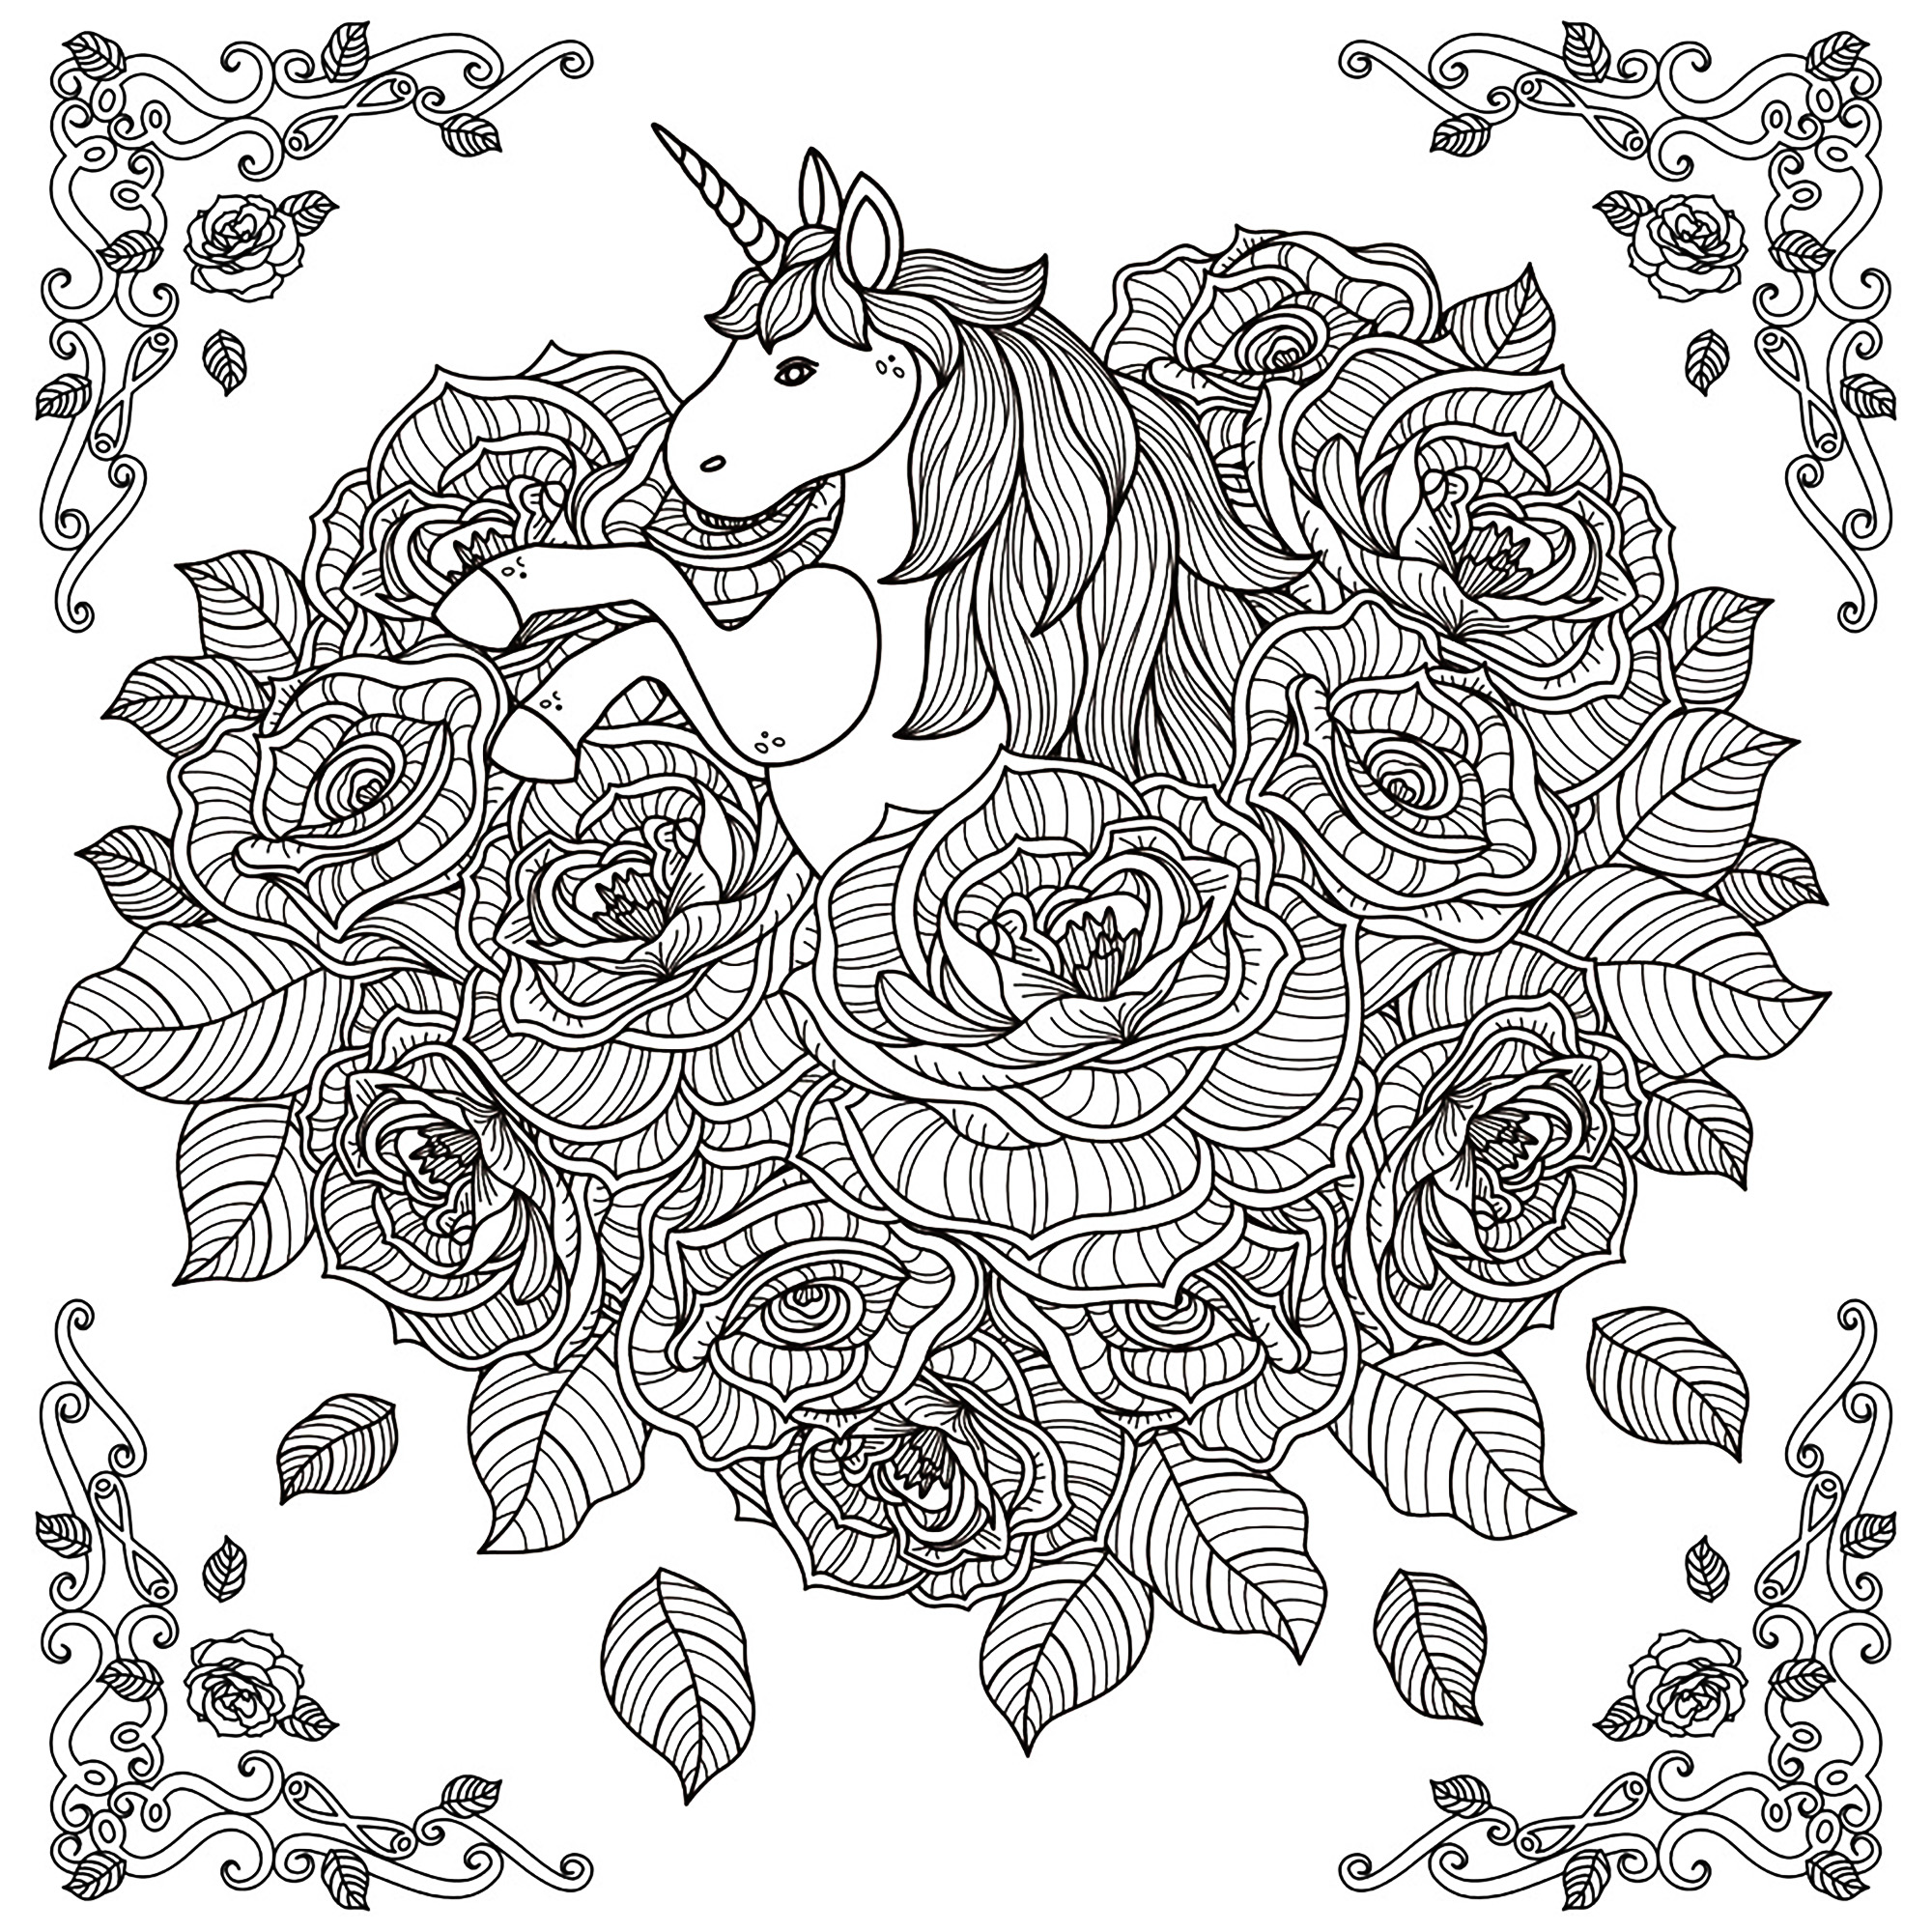 Unicorn Adult By Kchung Coloring Page